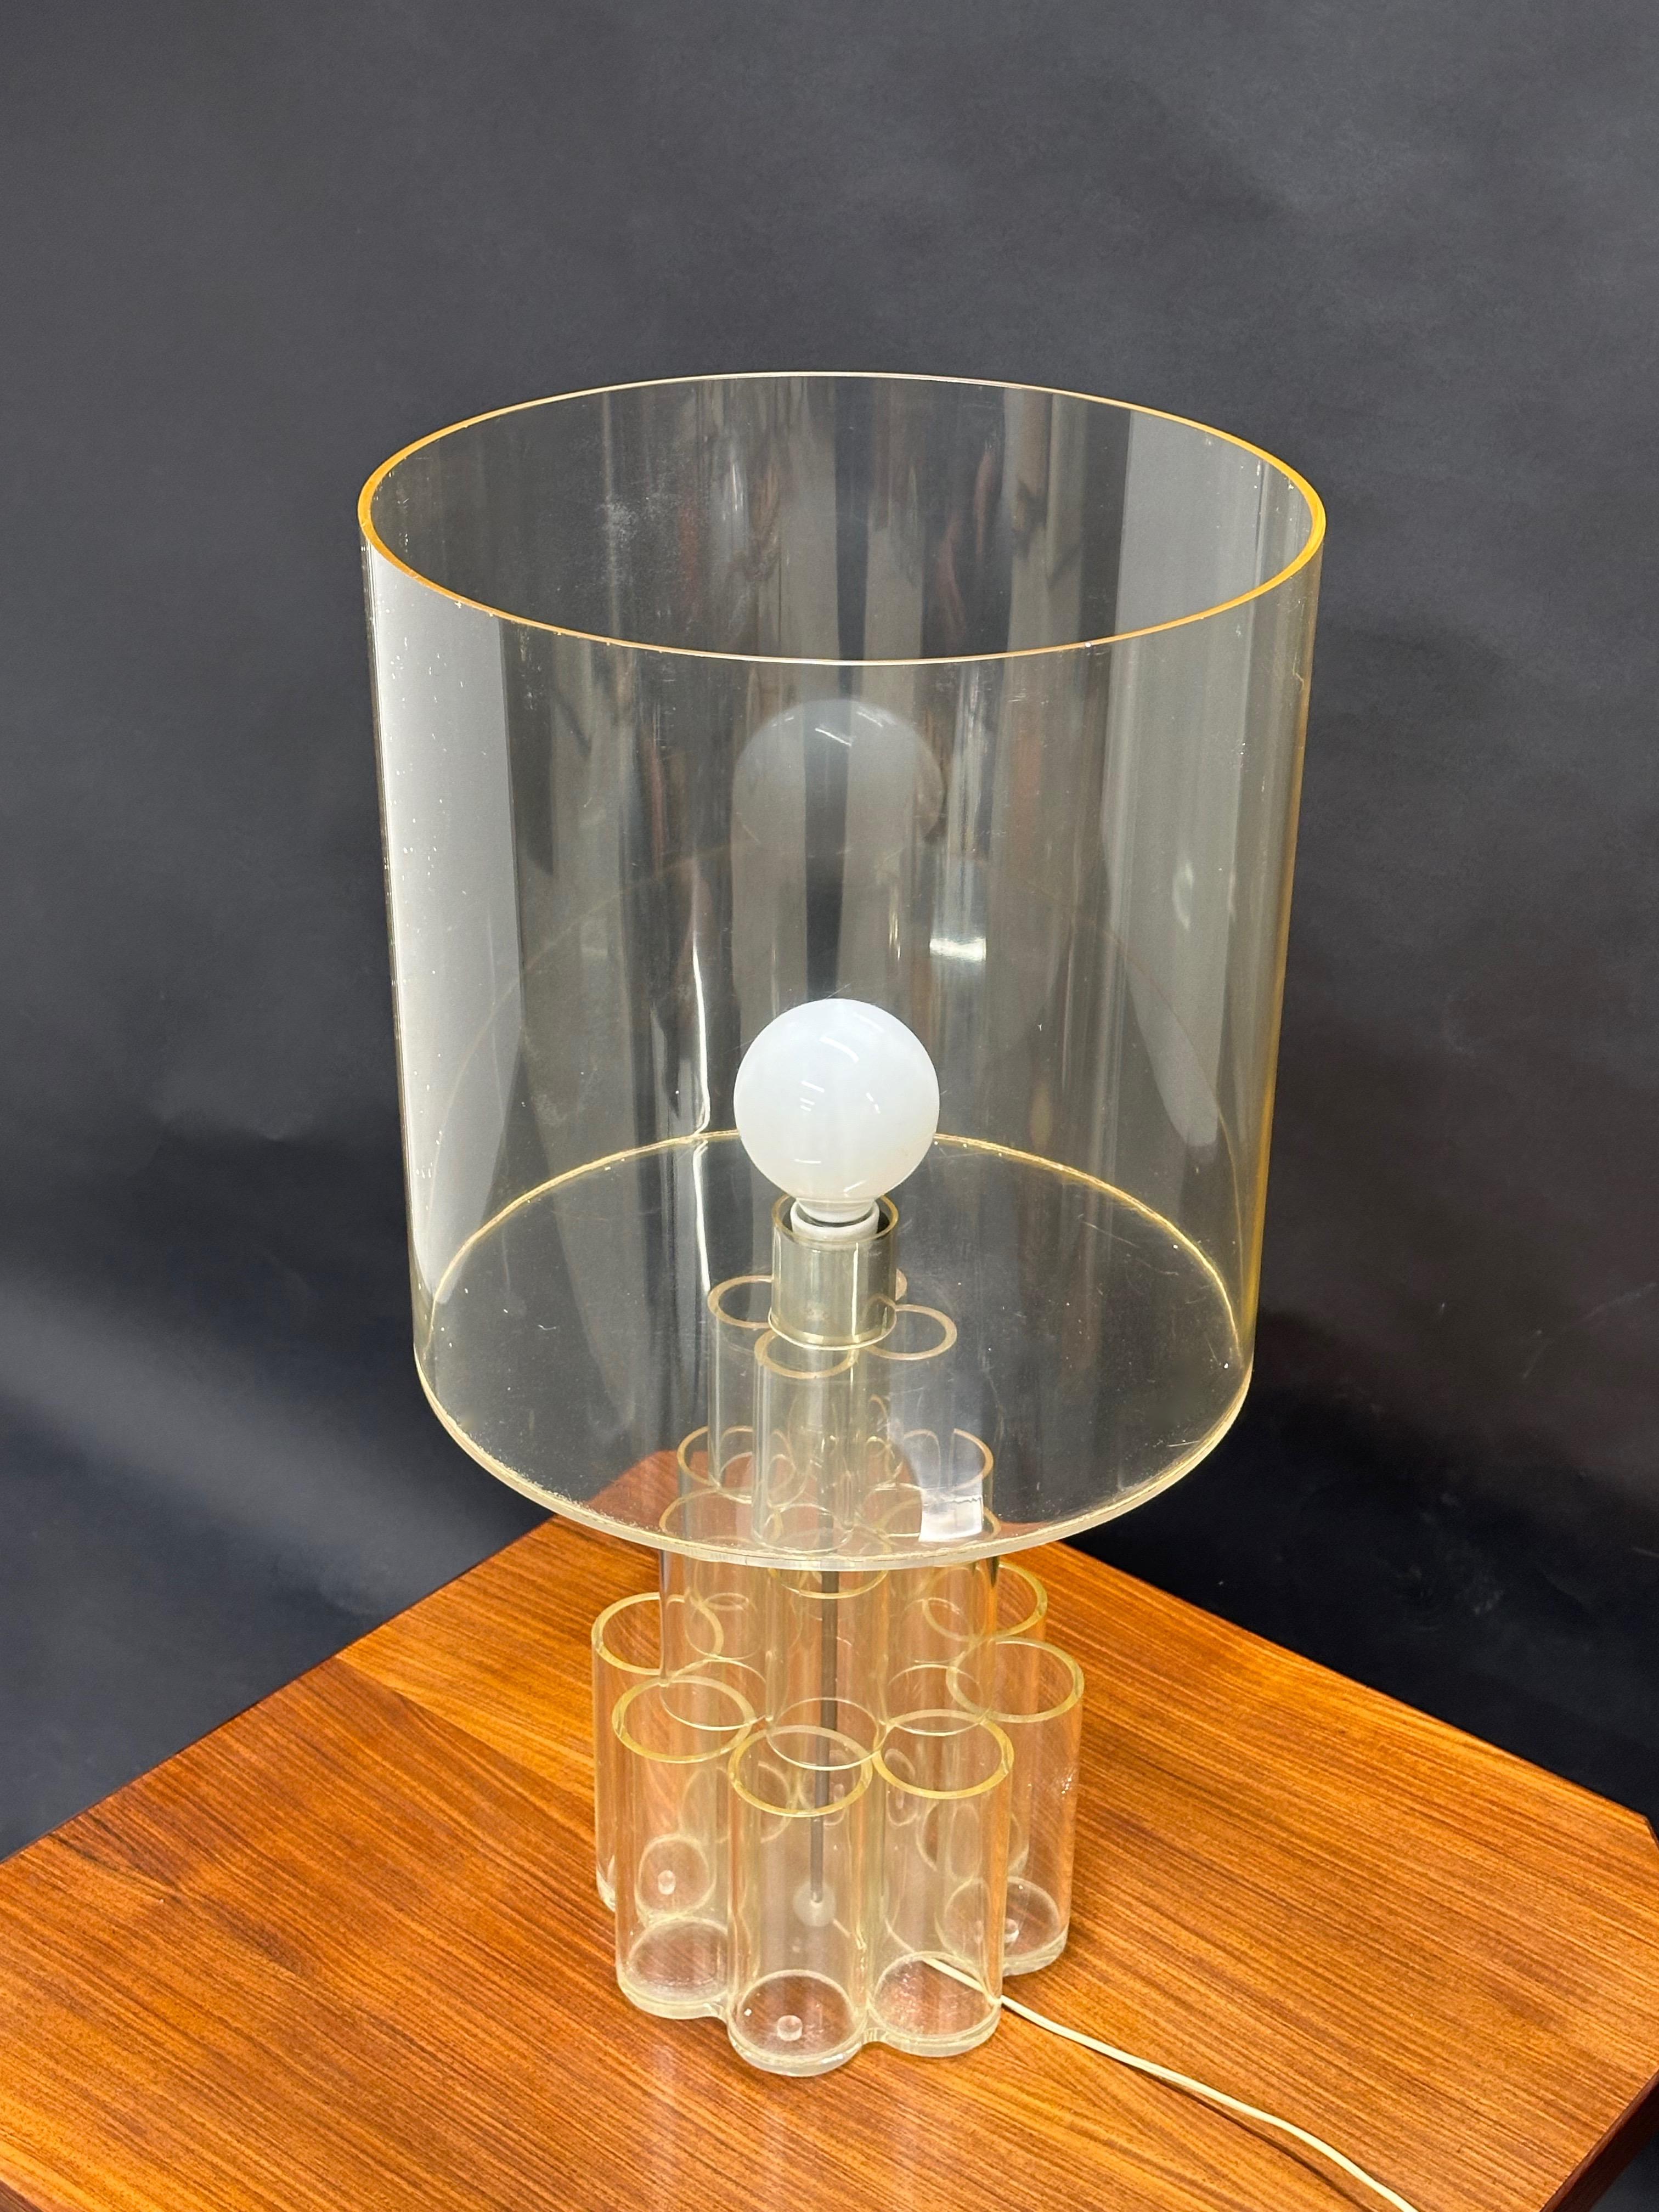 Mid-Century Modern Table Lamp in Lucite Plexiglass, Panton Style, Italy, 1970s For Sale 5